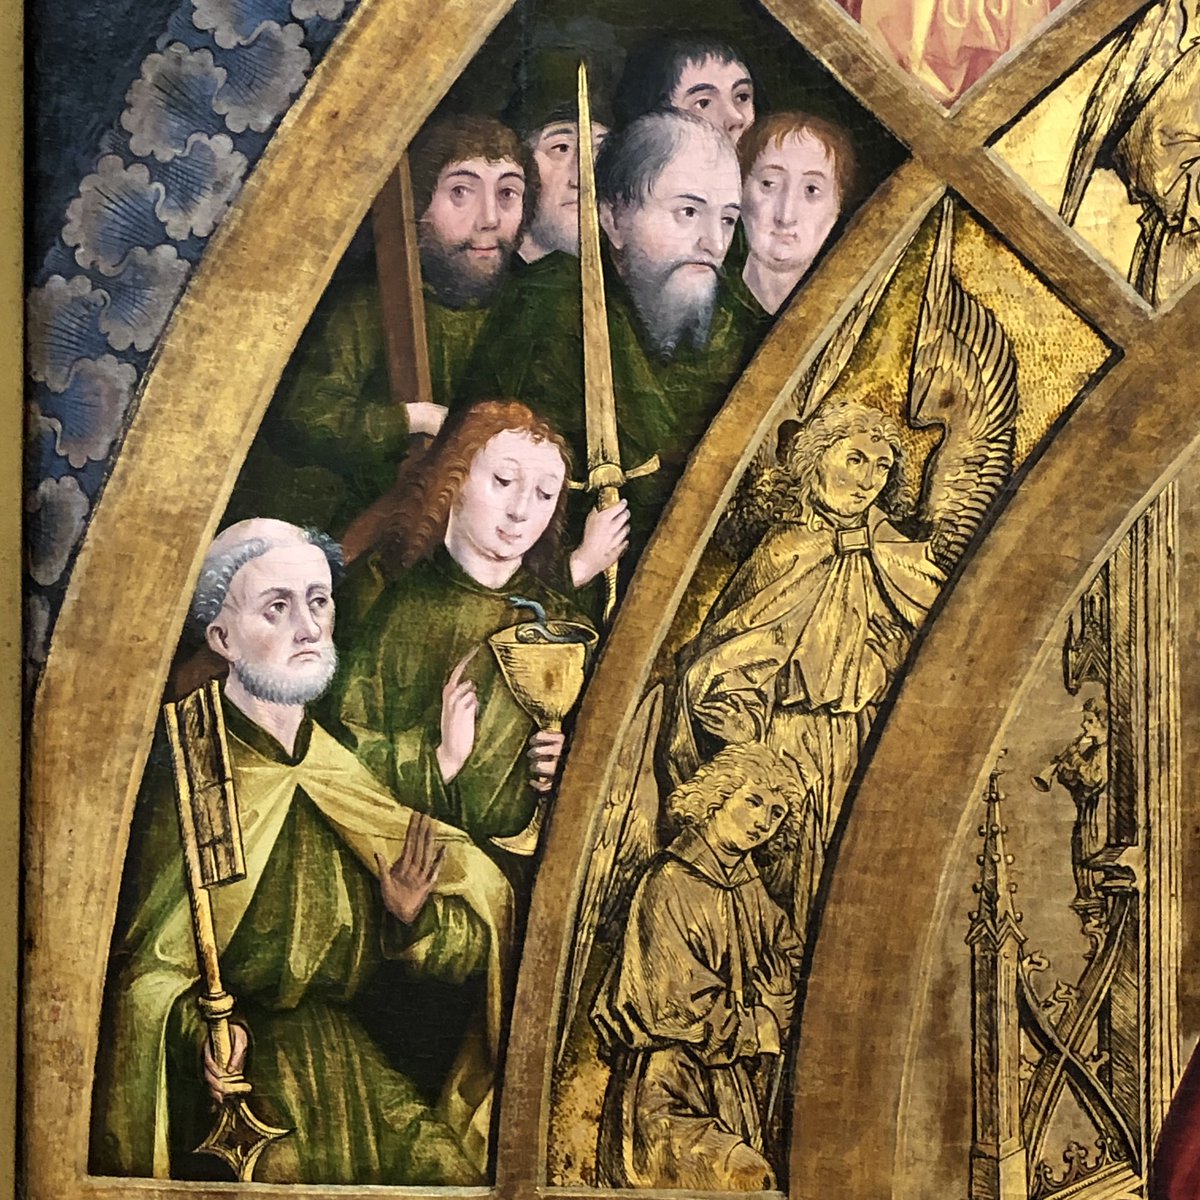 The best #circle I’ve spotted @kunstmuseumbs so far is this work by an anonymous Augsburger master, dated circa 1470, with exquisite colour coding for different categories of people #kramerseye #fineart #oldmasters #kunstmuseumbasel